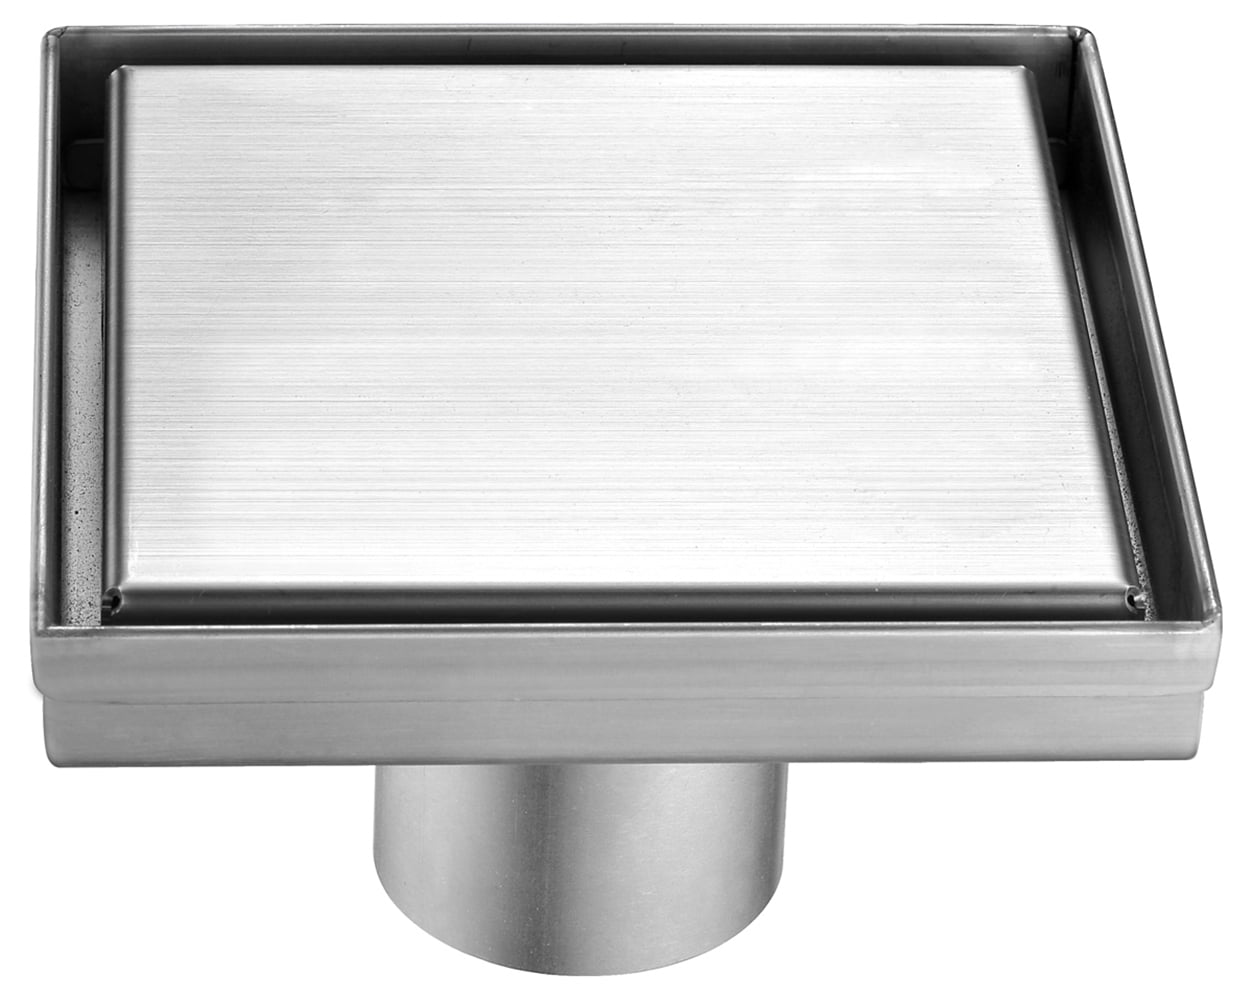 Picture of ALFI brand ABSD55B 5 x 5 in. Modern Square Stainless Steel Shower Drain with Solid Cover